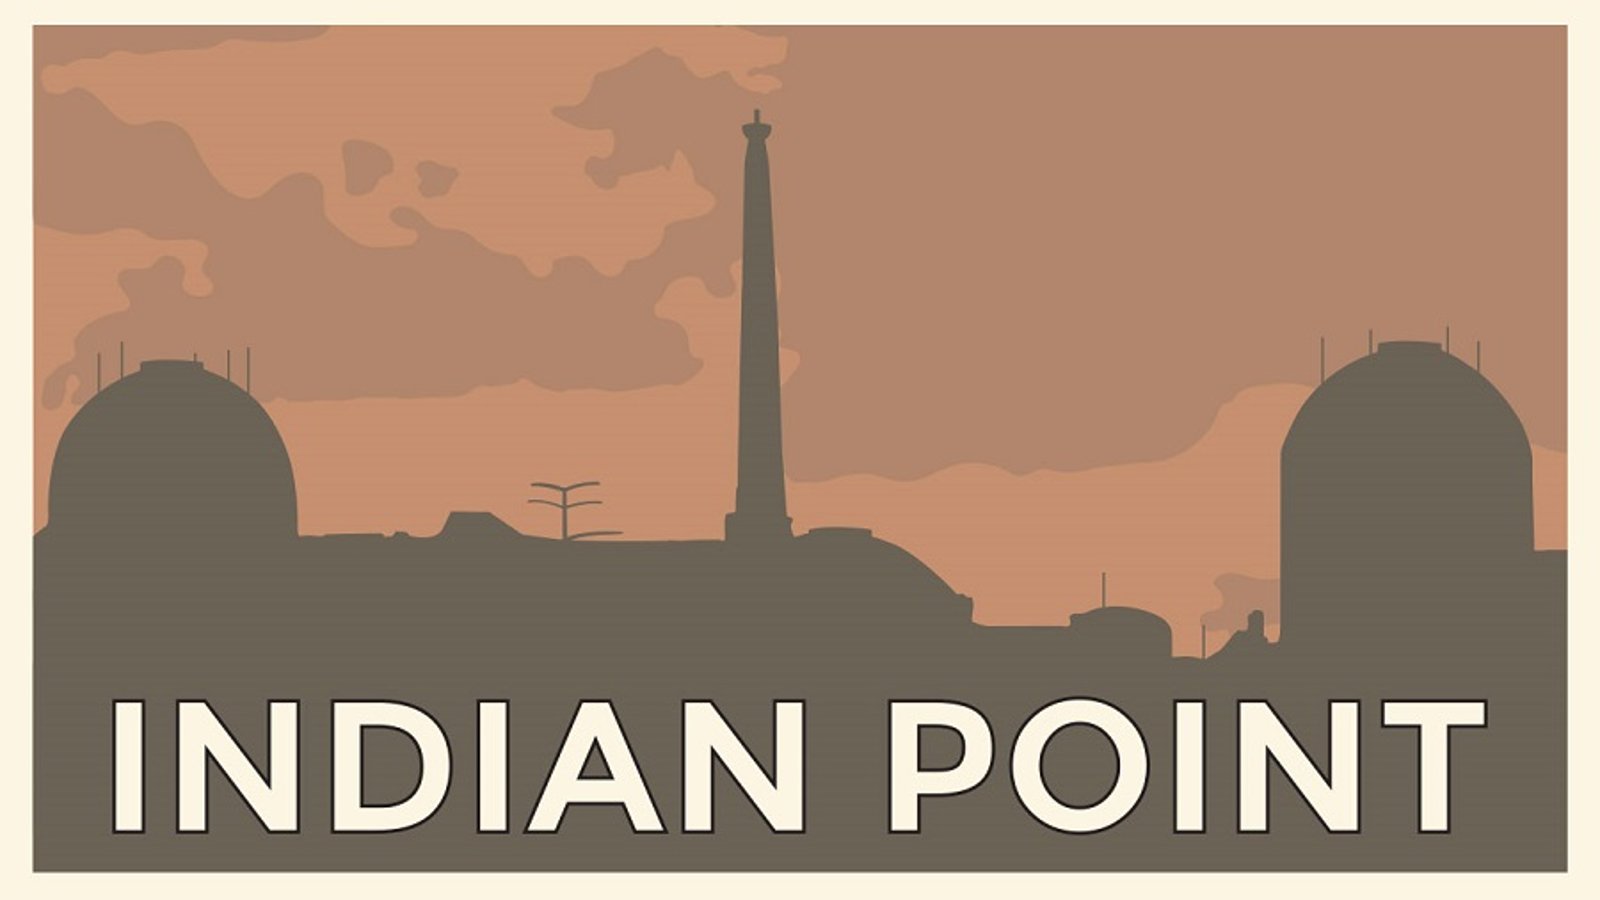 Indian Point - Nuclear Power Plant